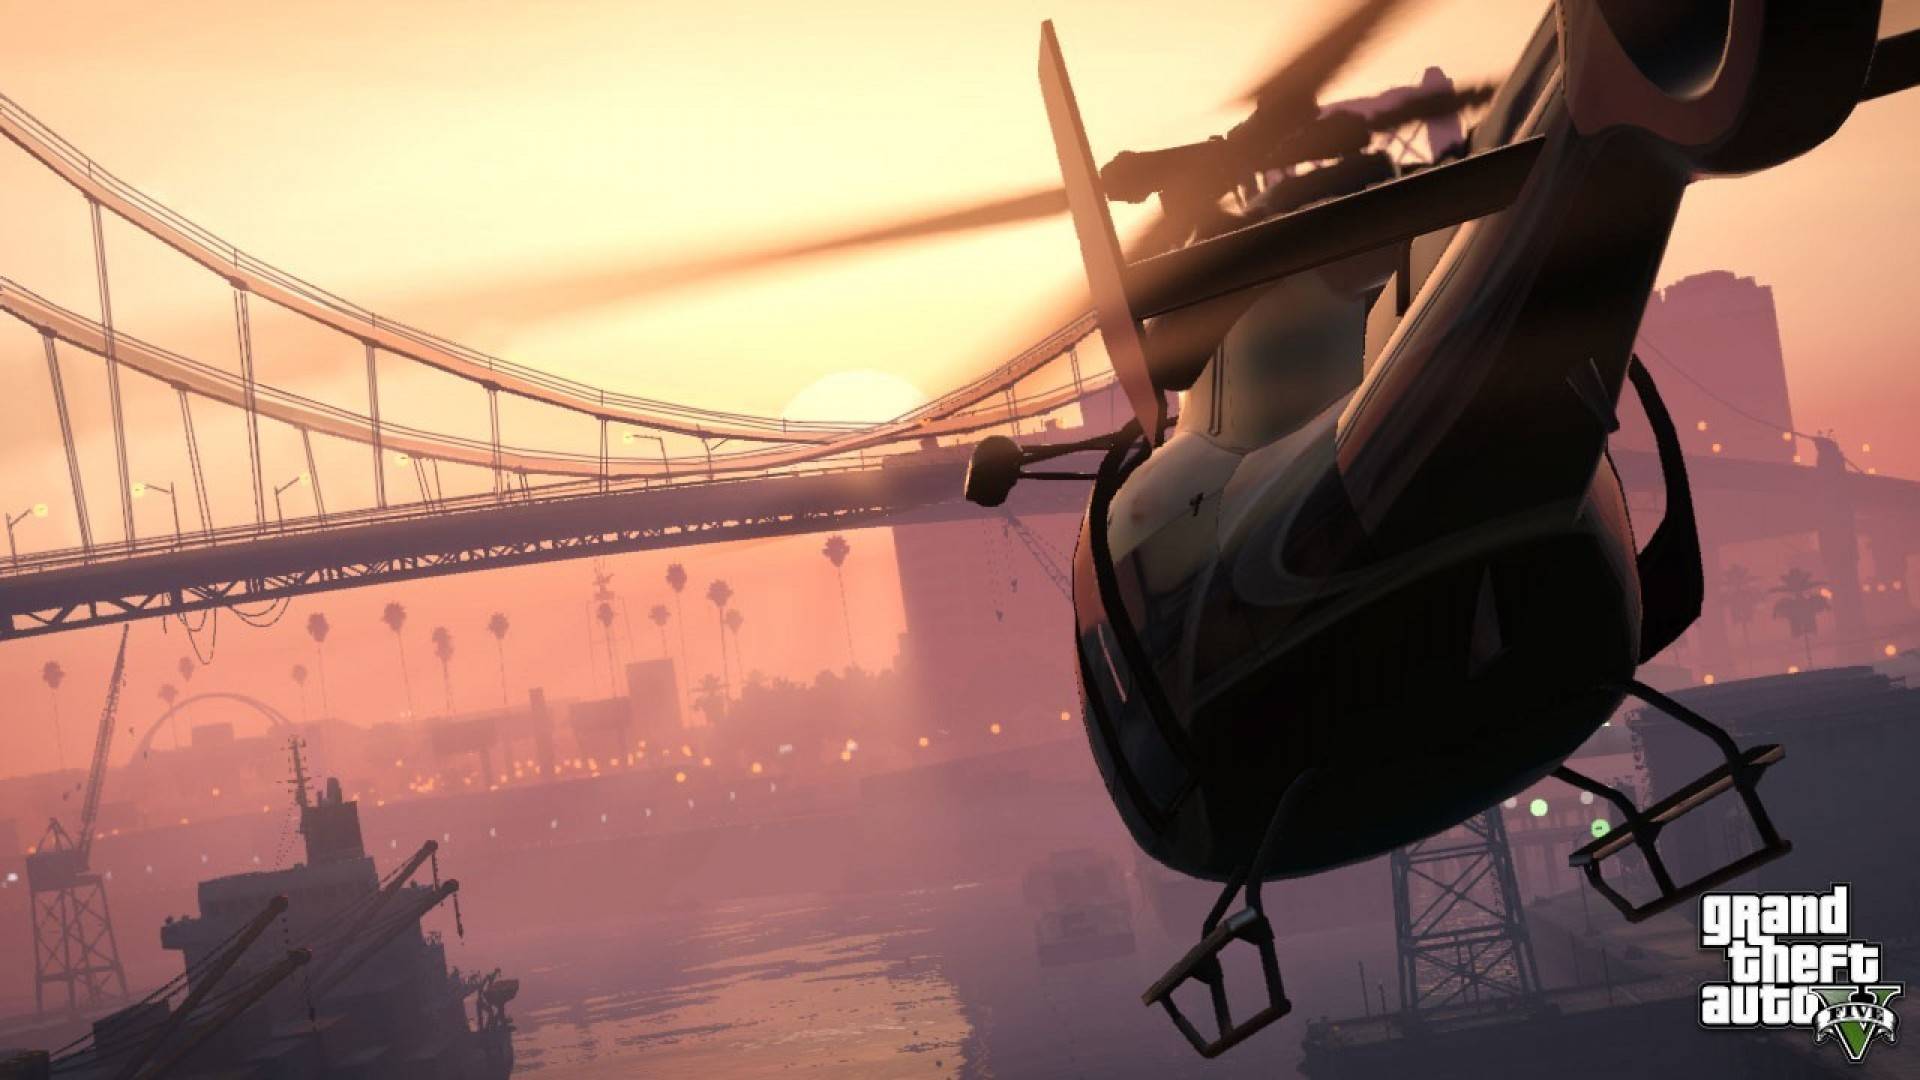 Grand Theft Auto gta 5 Hd Wallpaper - Free Android Application